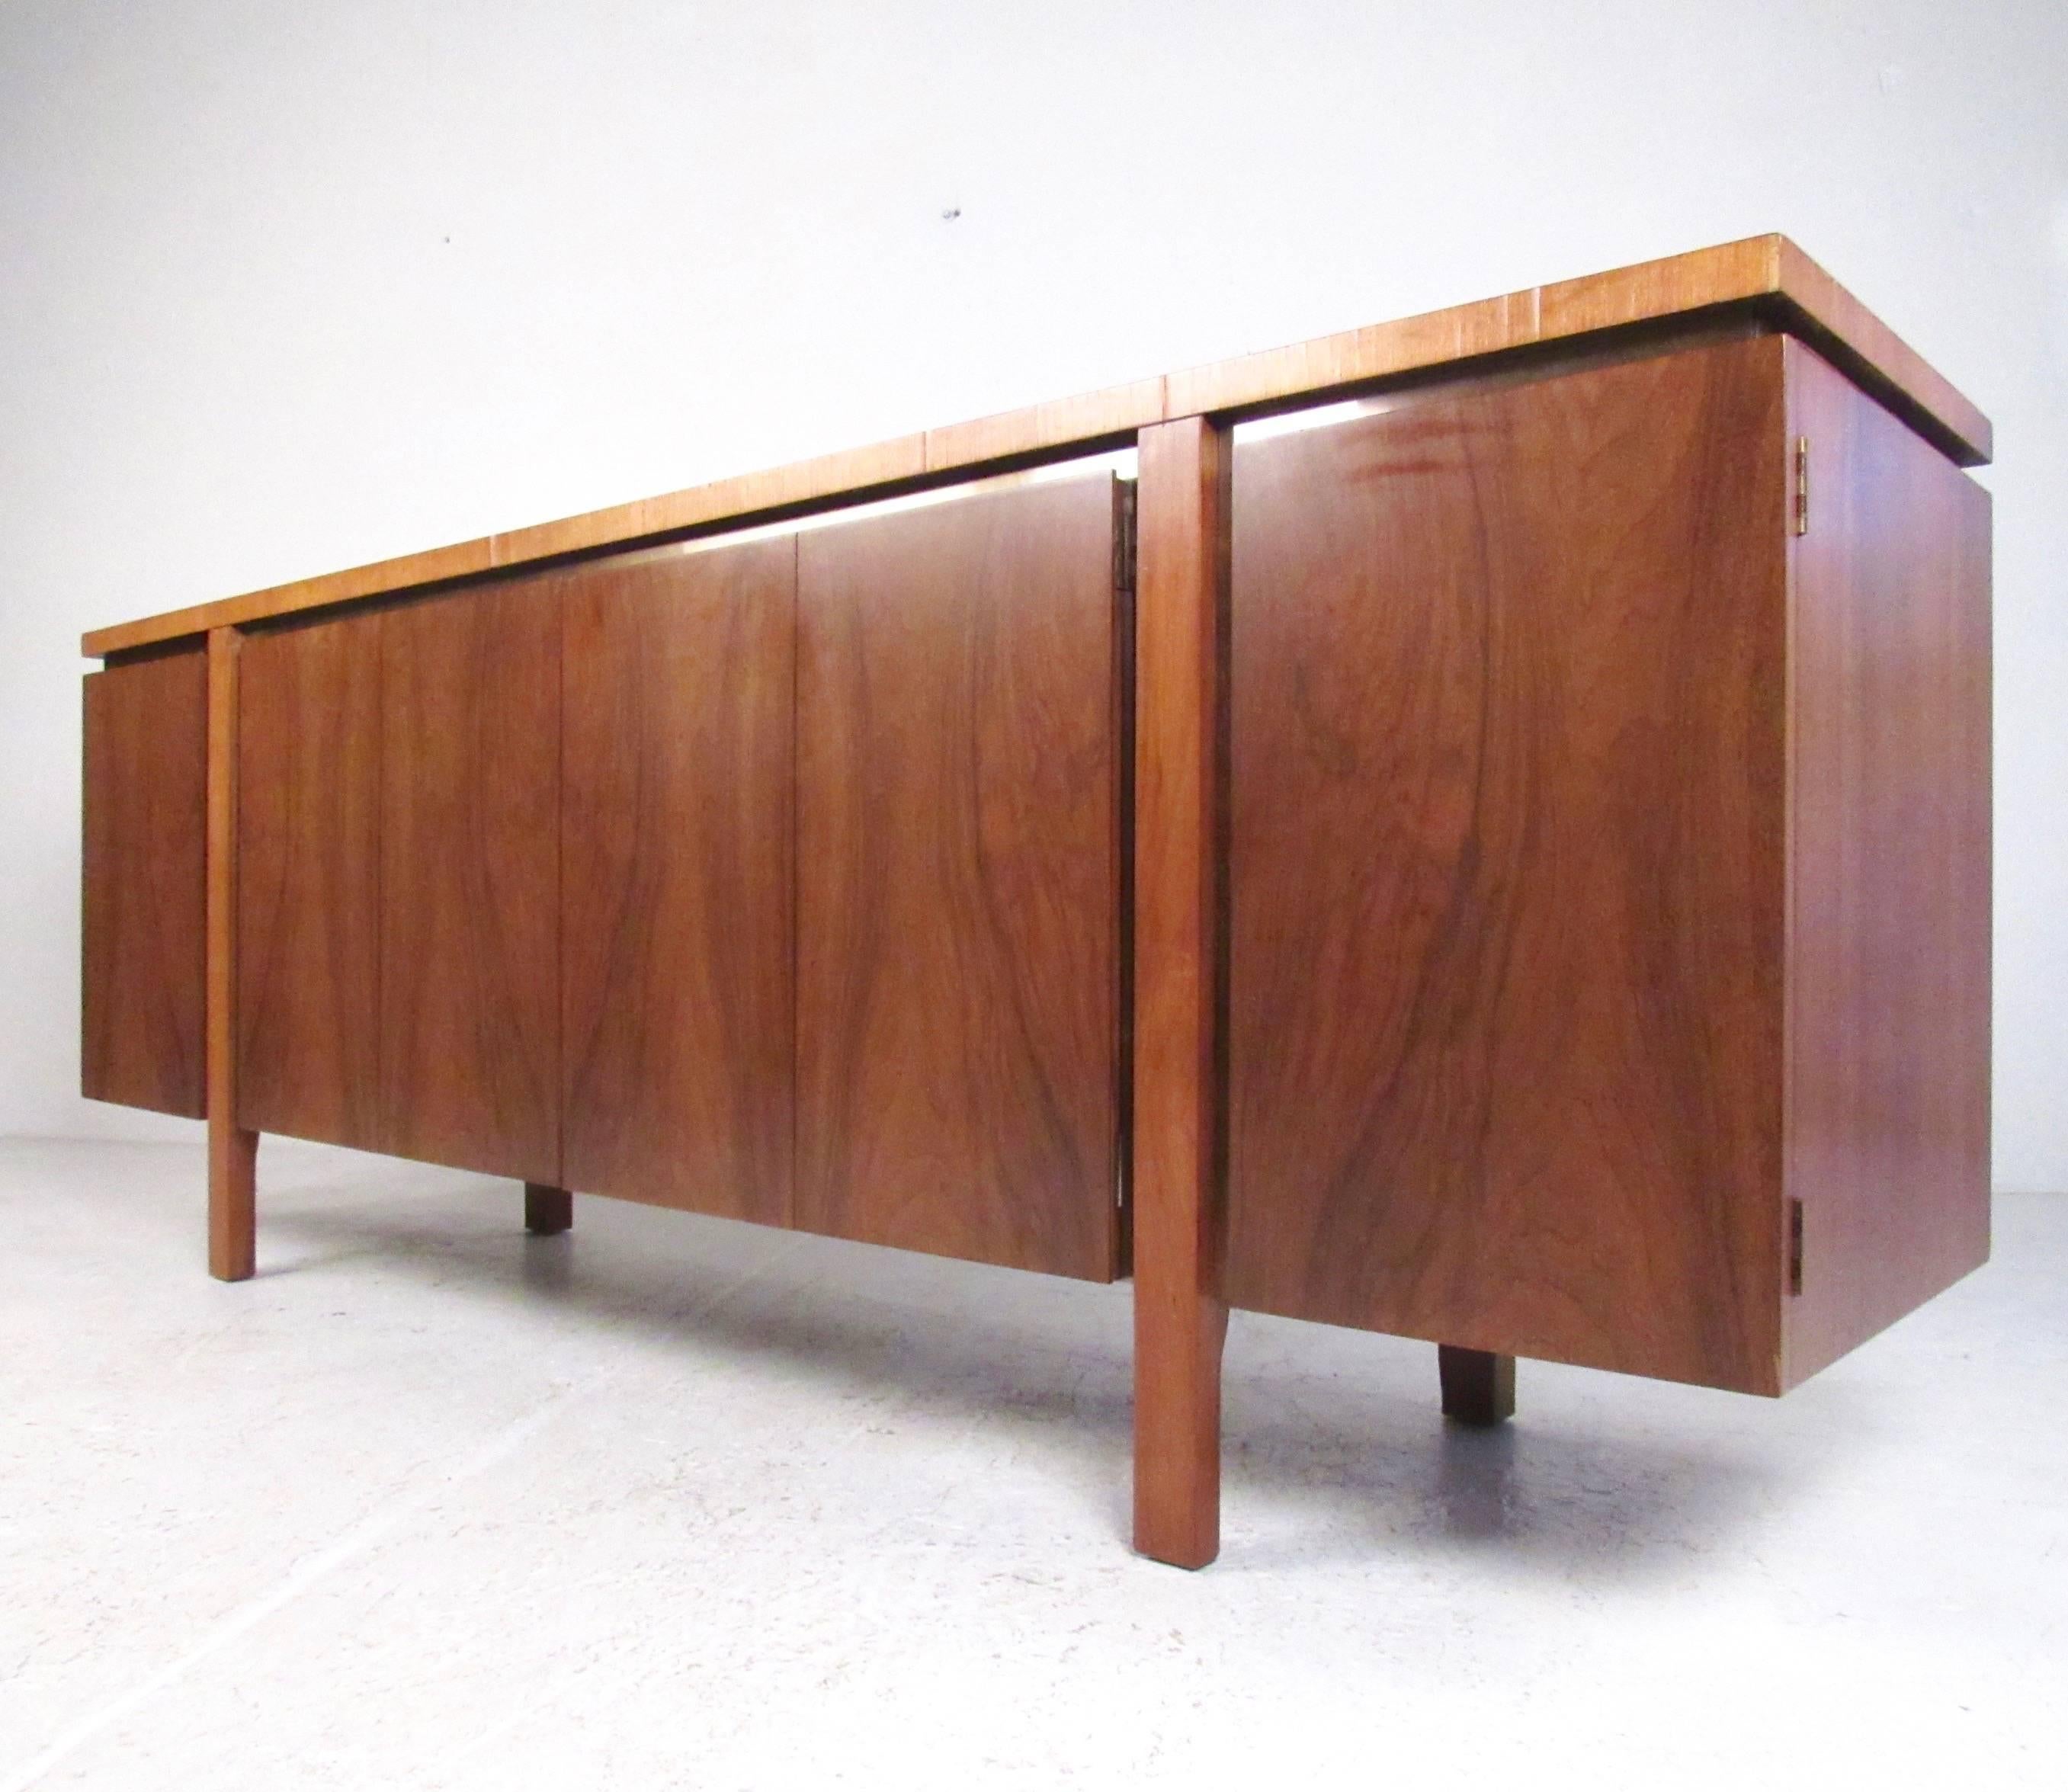 This beautiful Mid-Century Modern sideboard features unique TH Robsjohn-Gibbings design, including gorgeous matched wood finish, spacious storage cabinets, and stylized brass finish trim. This striking branded dining room server makes an impressive